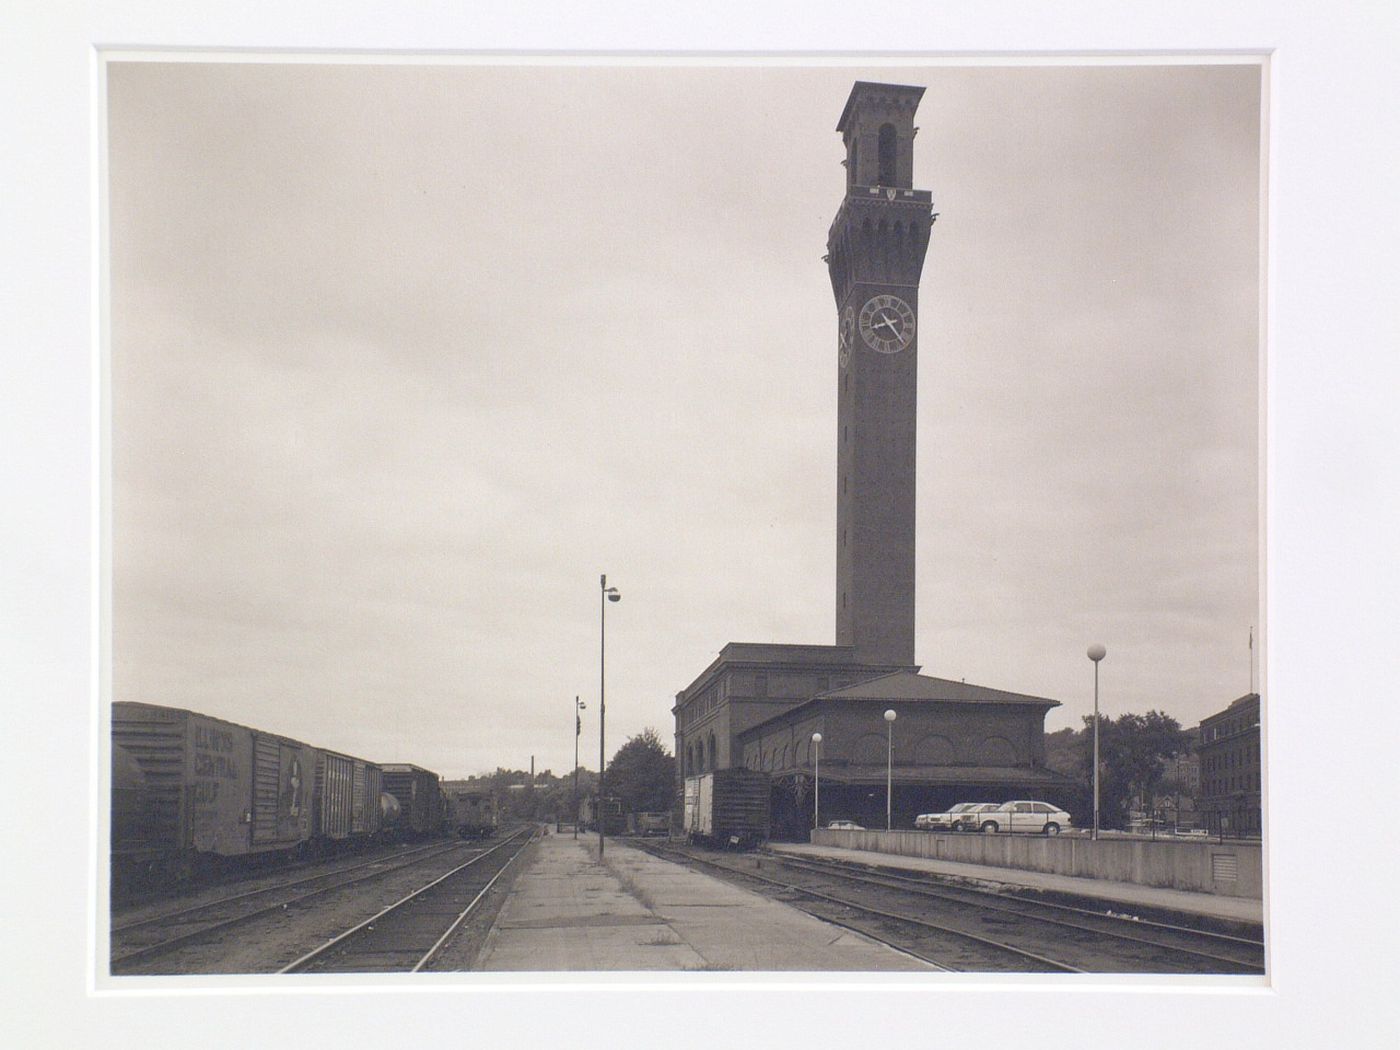 View of train depot with clocktower, trains on tracks, Waterbury, Connecticut